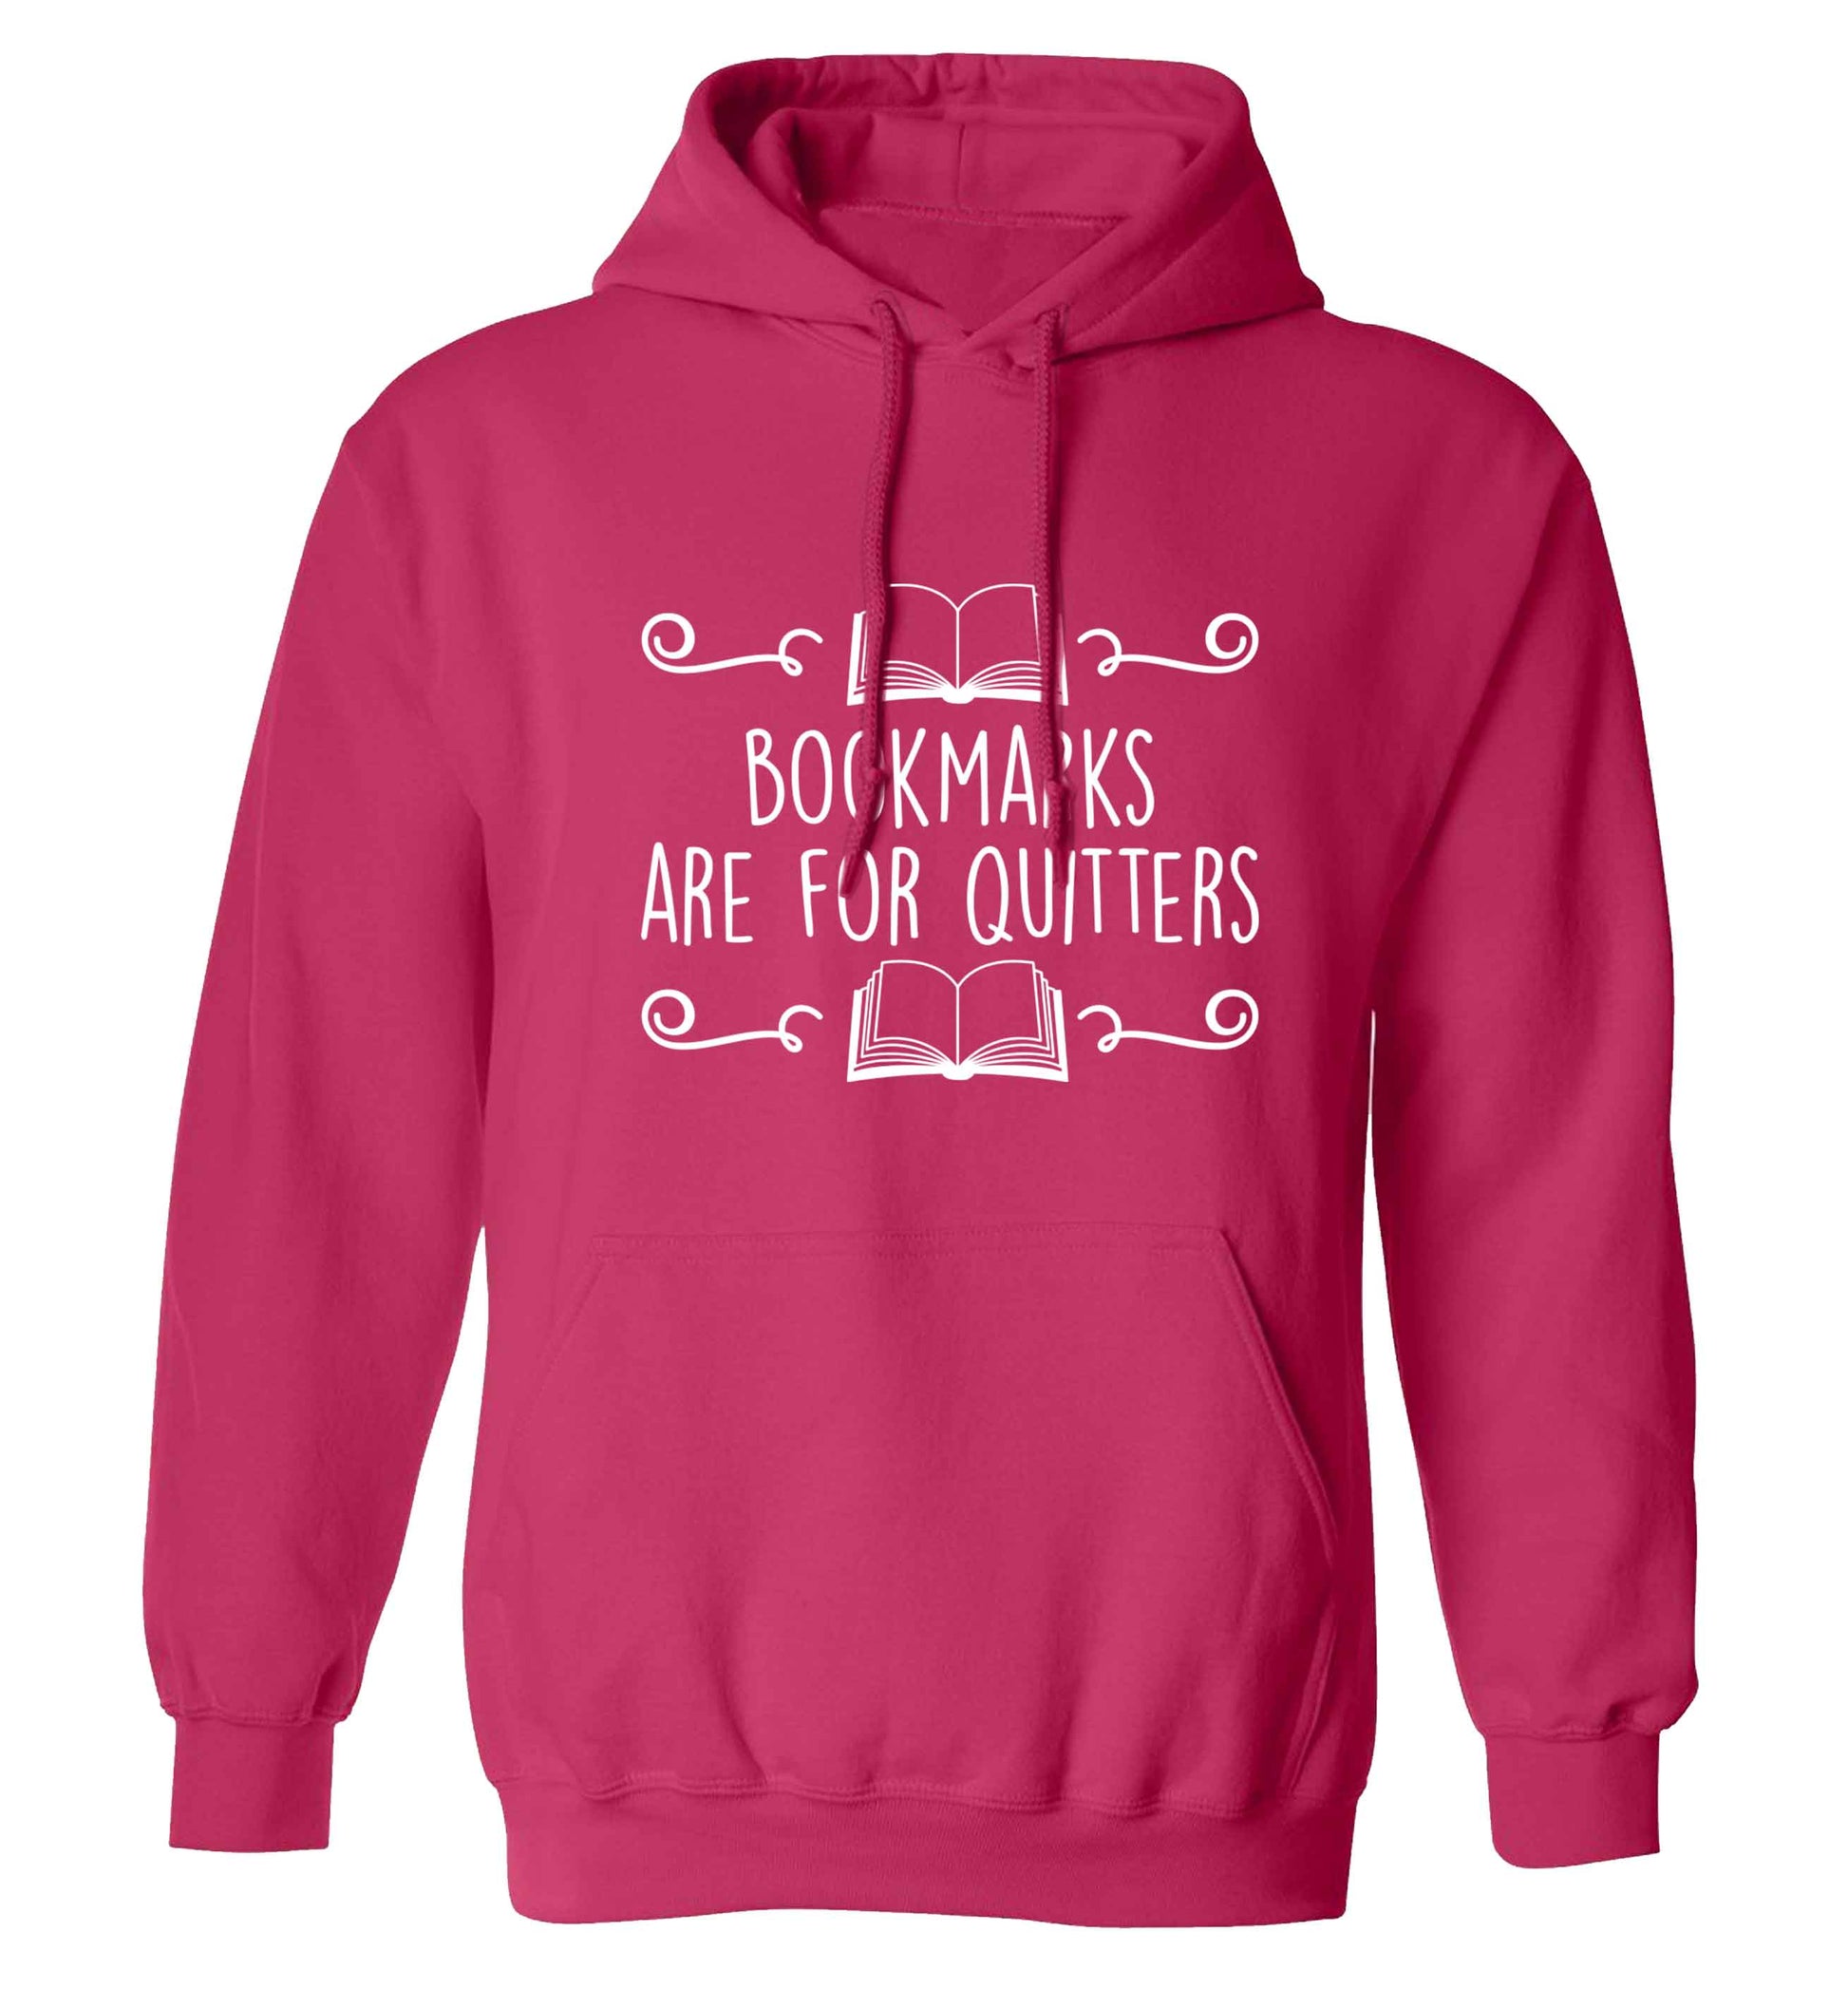 Bookmarks are for quitters adults unisex pink hoodie 2XL